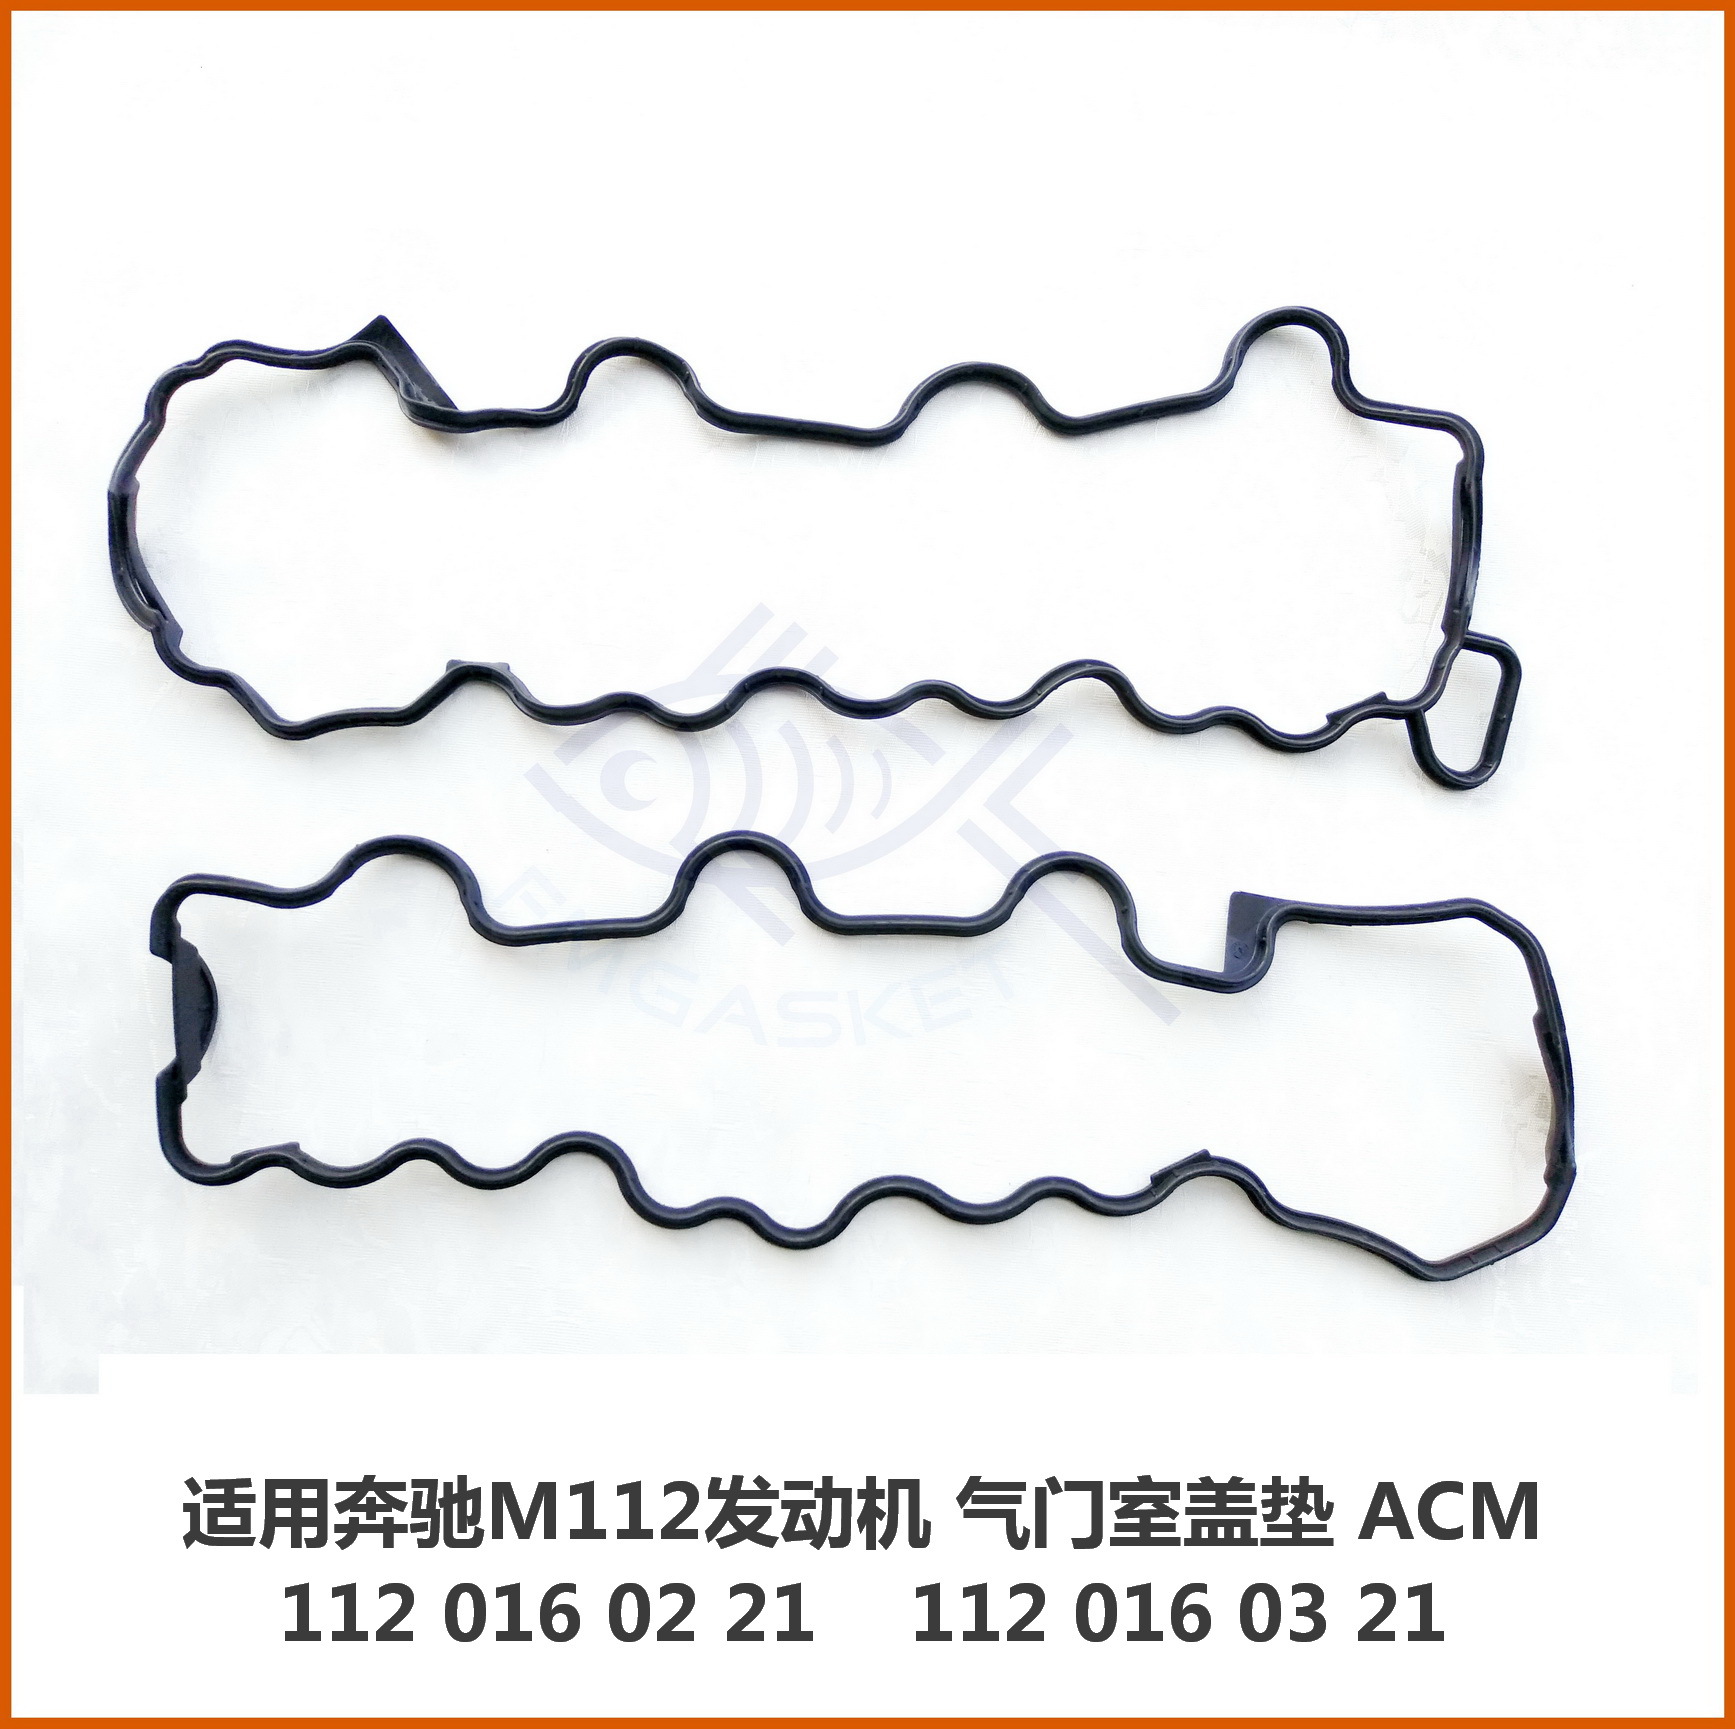 Applicable Benz M112 Valve Cover Gasket S-Class 1120160221 1120160321